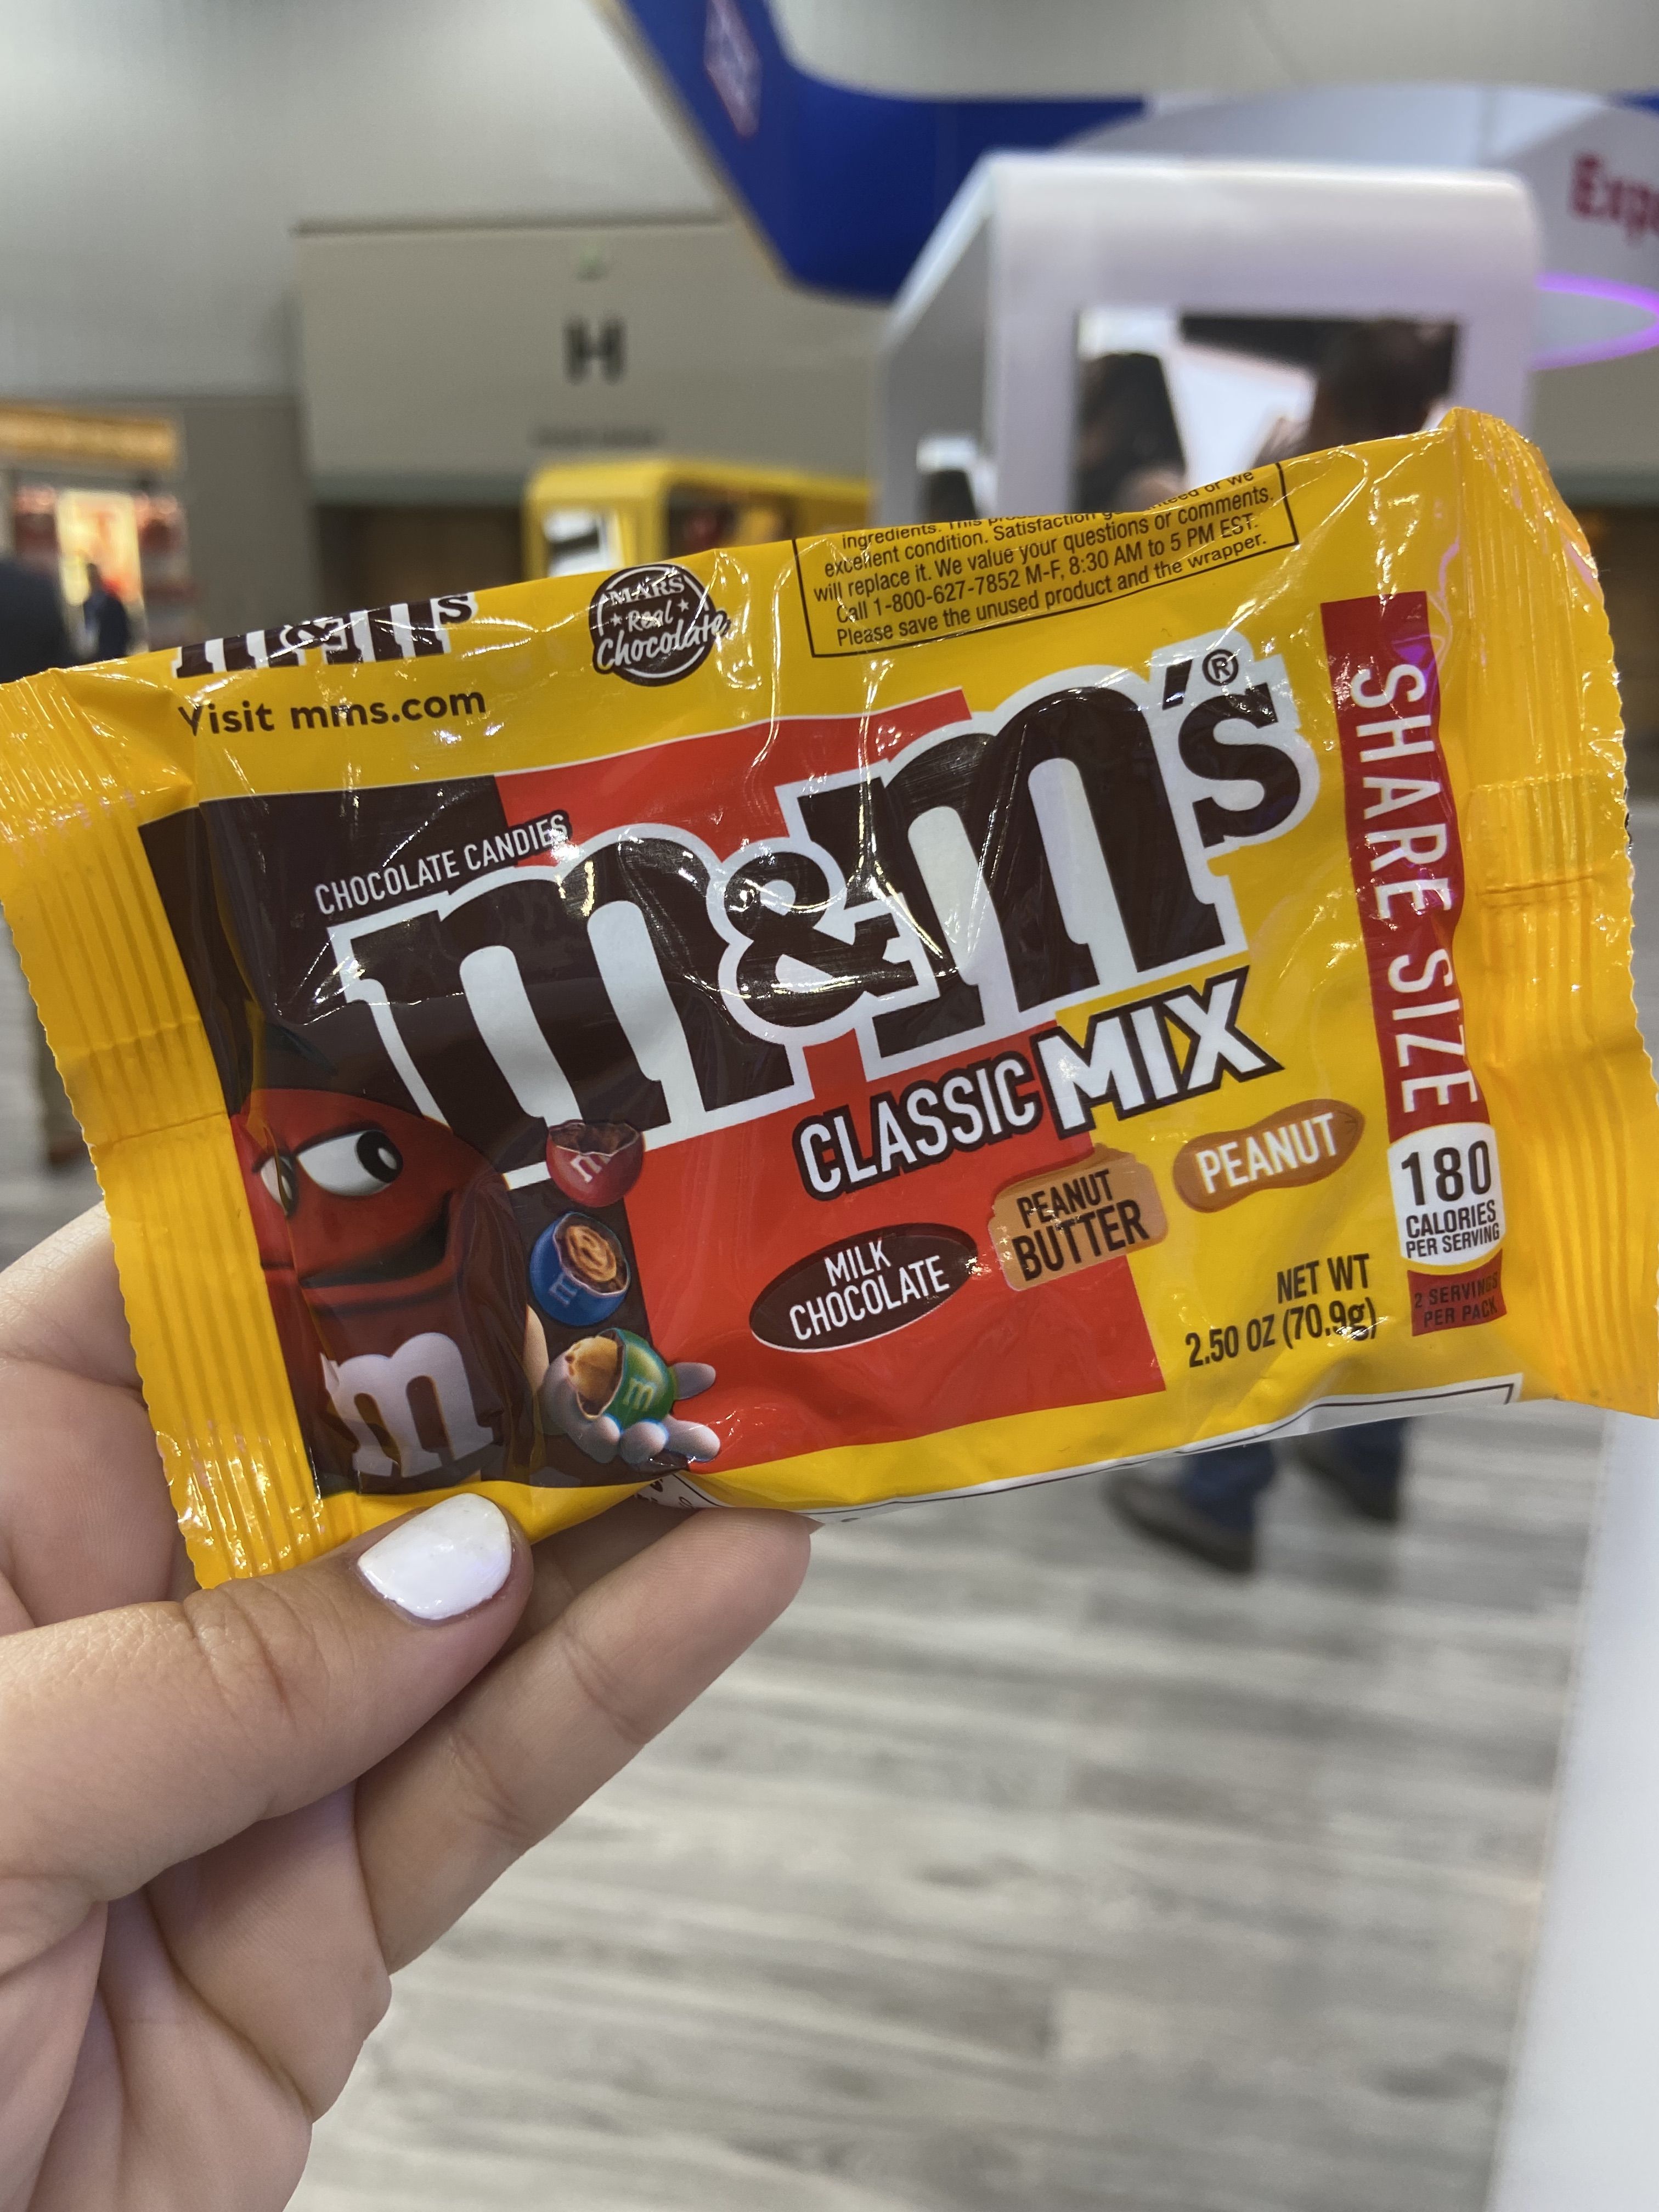 M&Ms Advertising Strategy: How To Keep People Craving